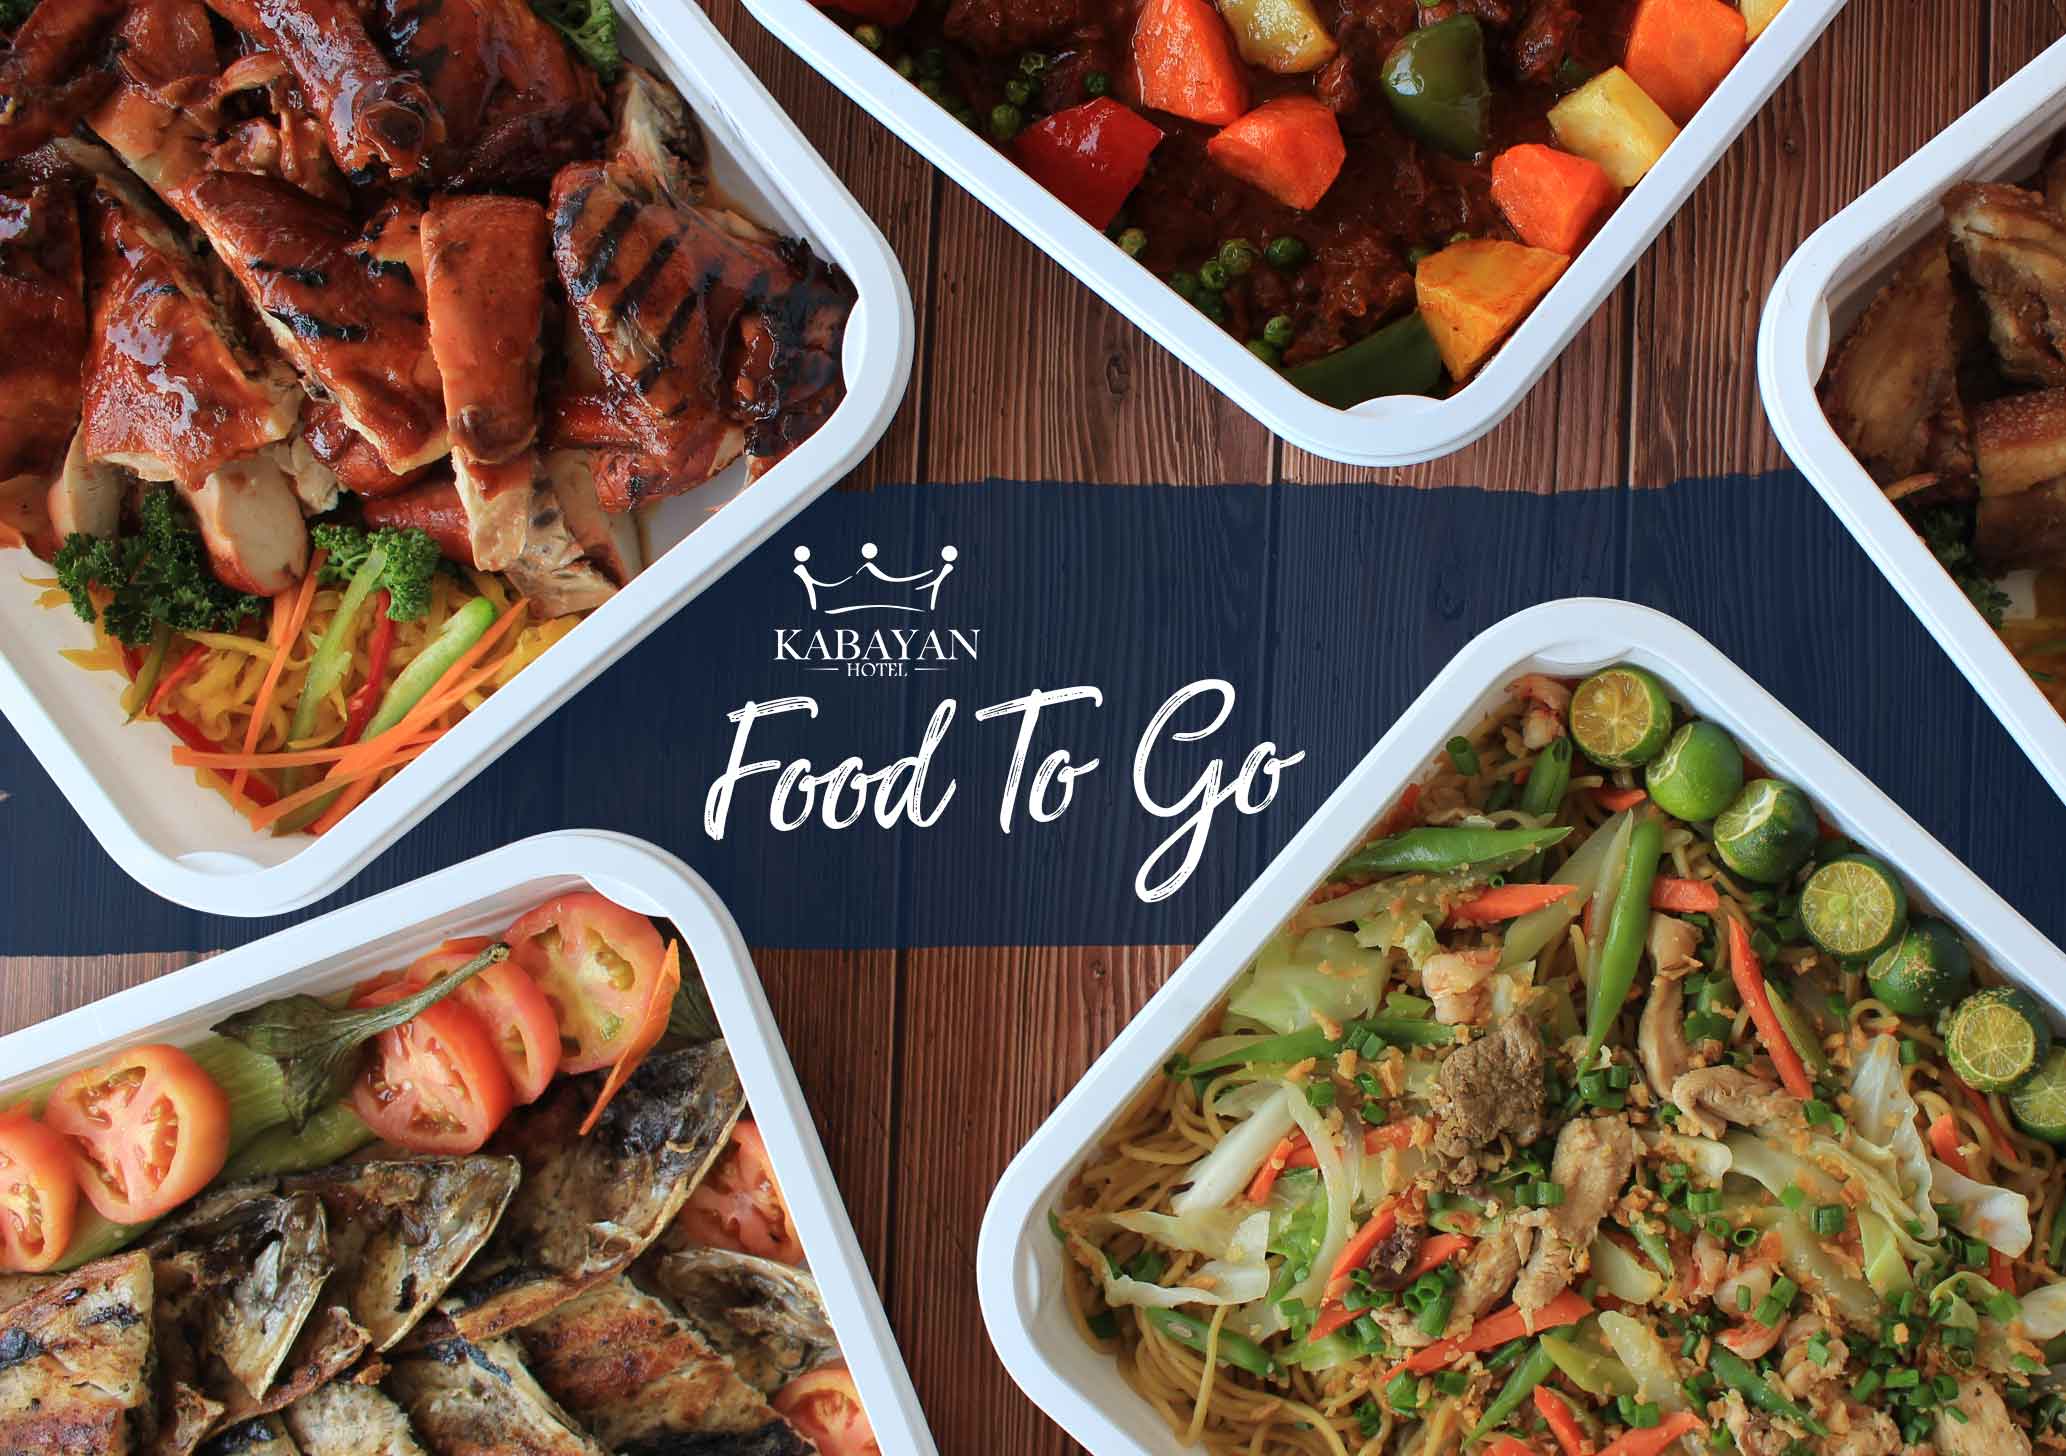 Kabayan Hotel Food To Go platters